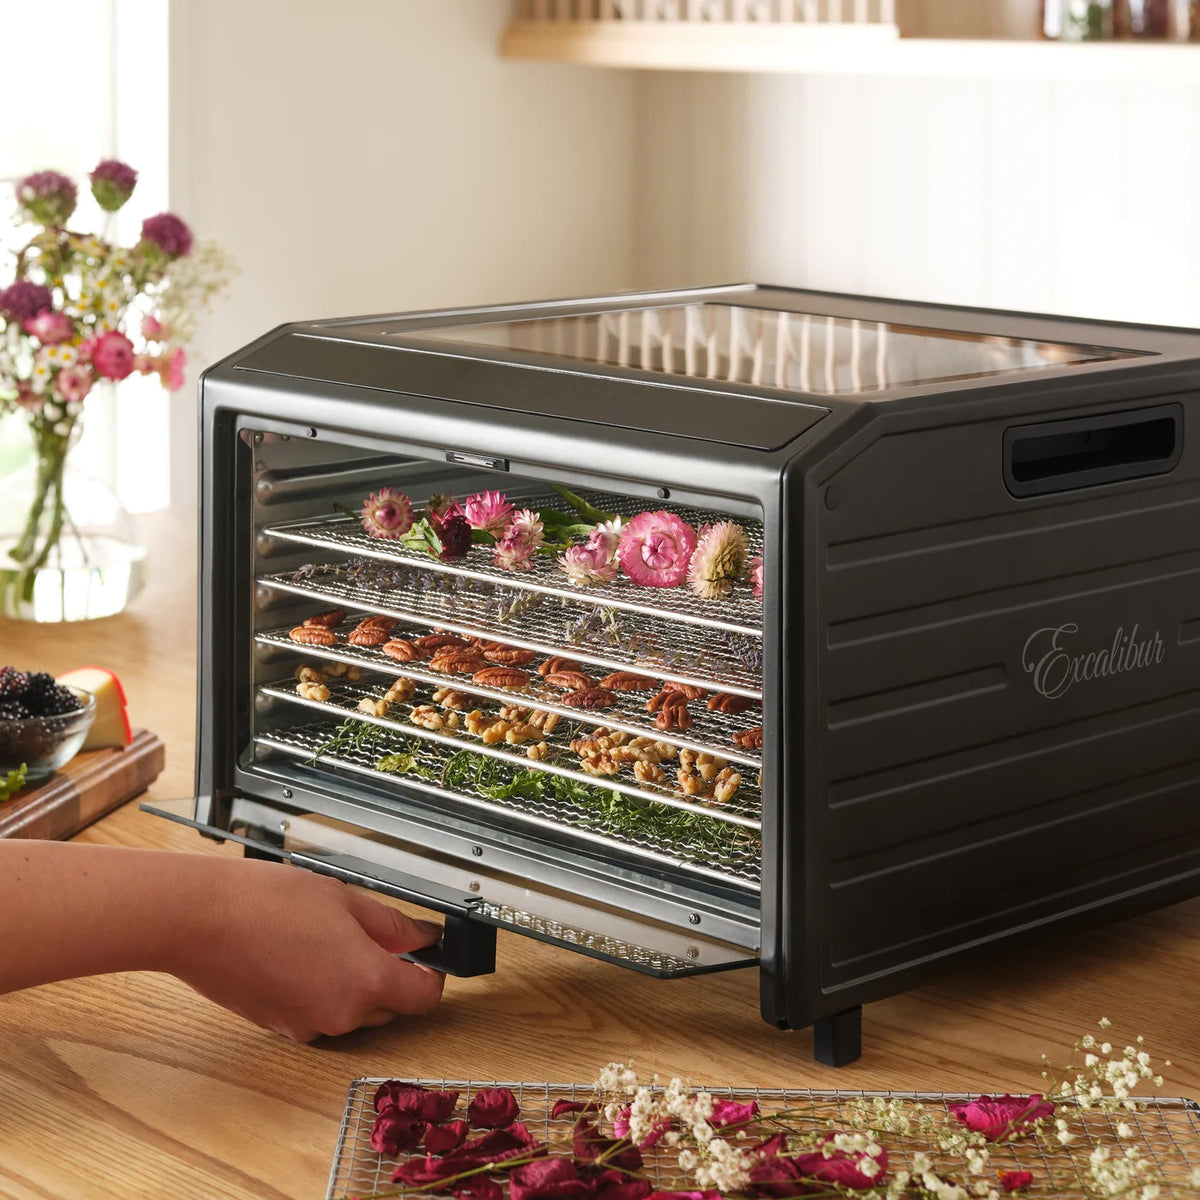 Excalibur DH06SS dehydrator with flowers on trays.